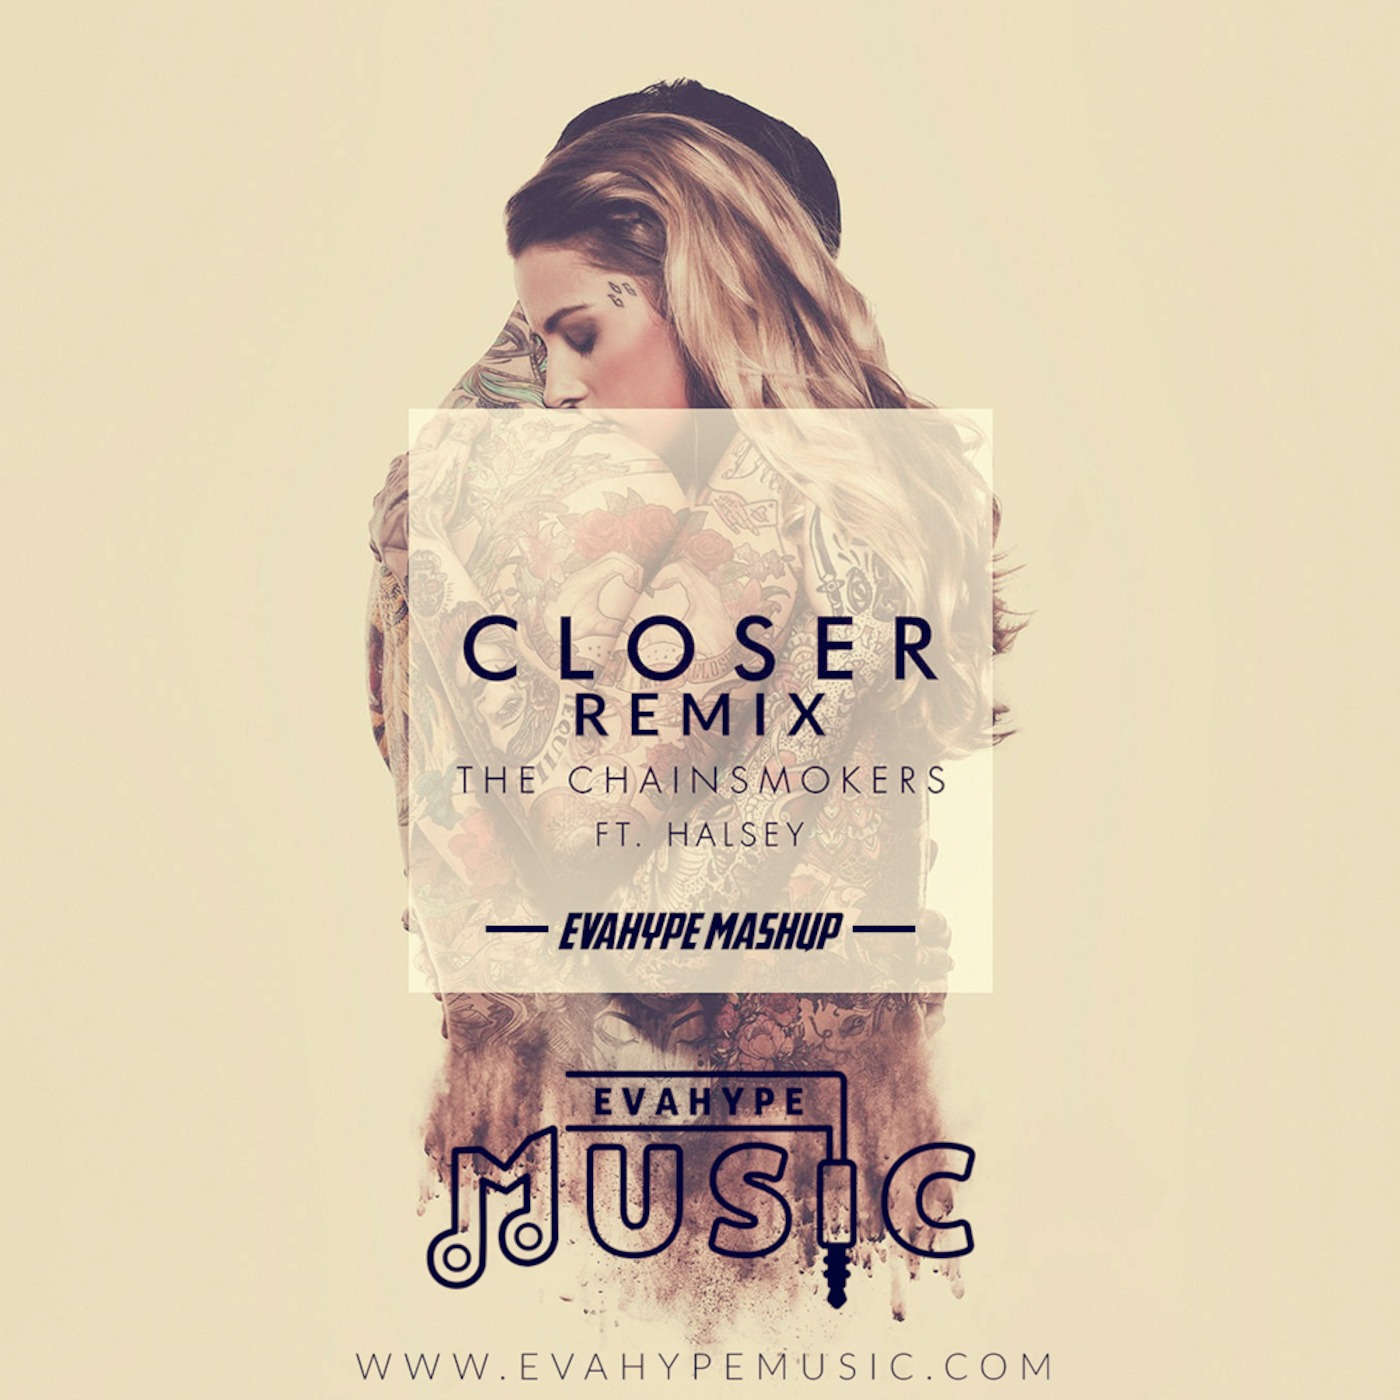 The Chainsmokers ft. Halsey - Closer Remix (EvaHype Mashup)